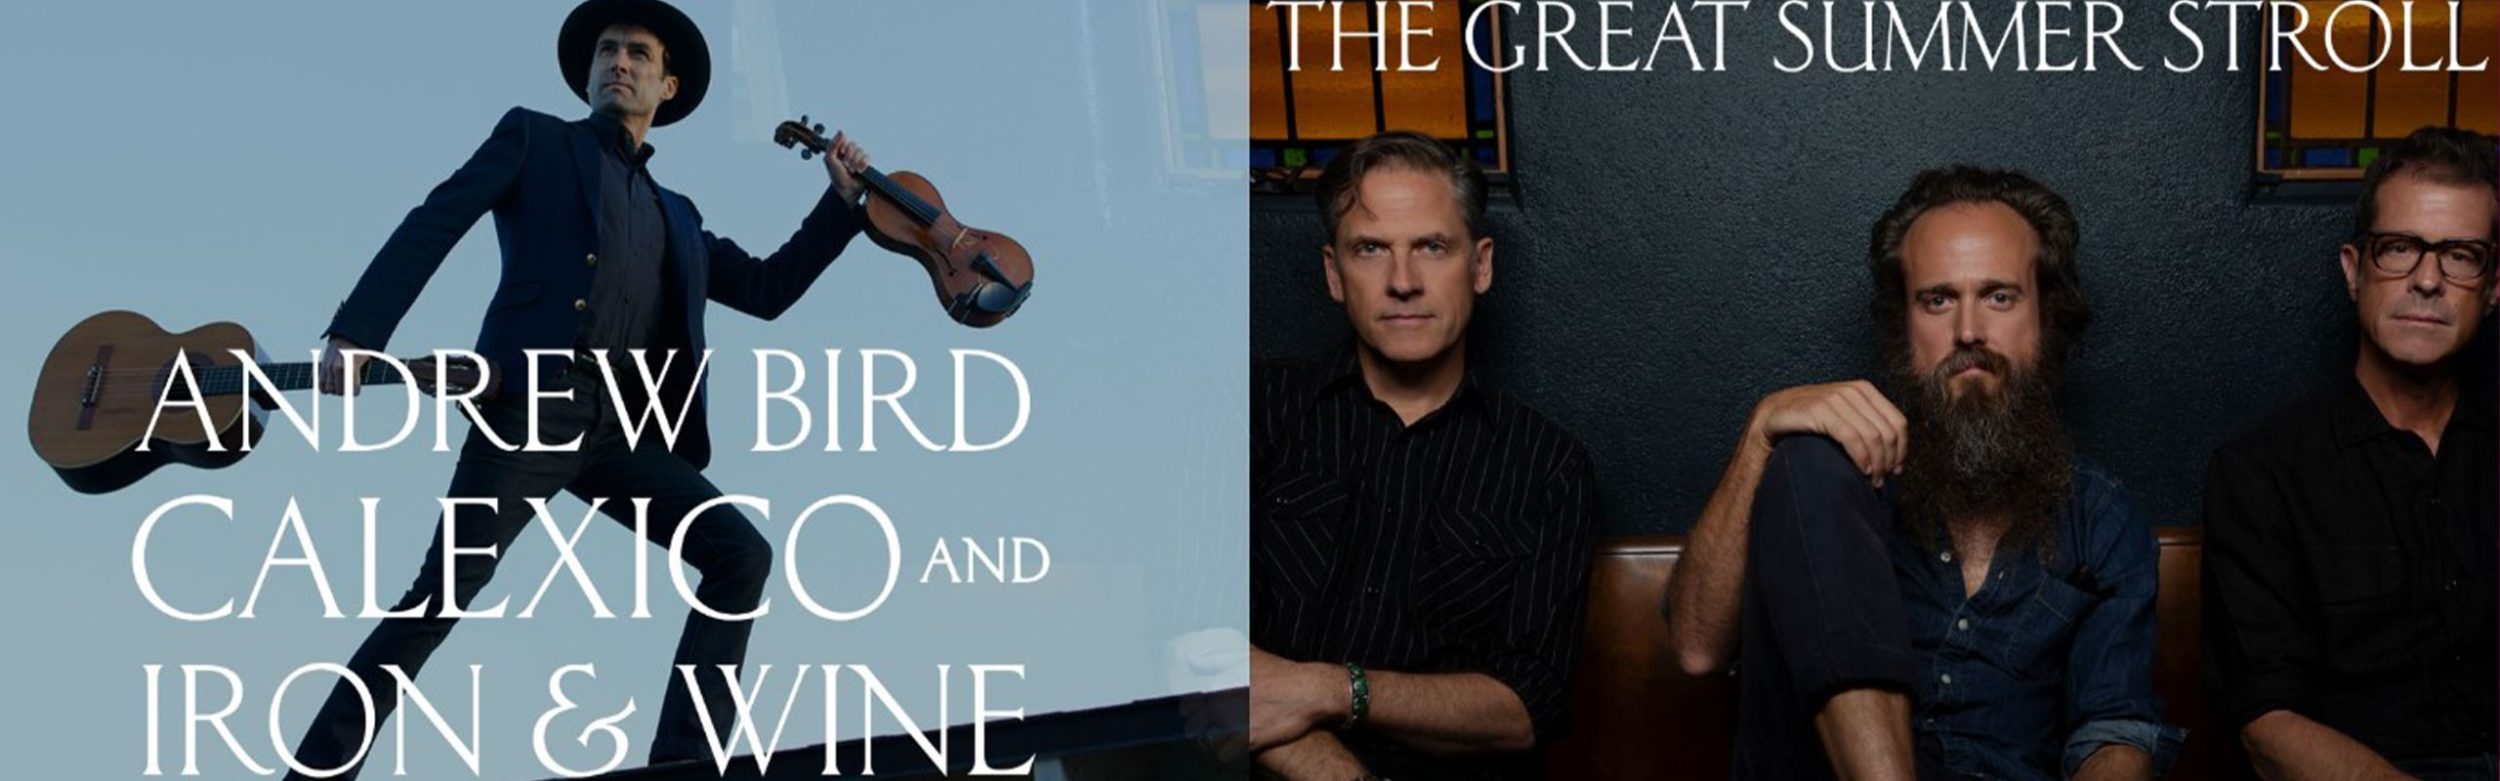 Andrew Bird, Calexico and Iron and Wine - The Great Summer Stroll